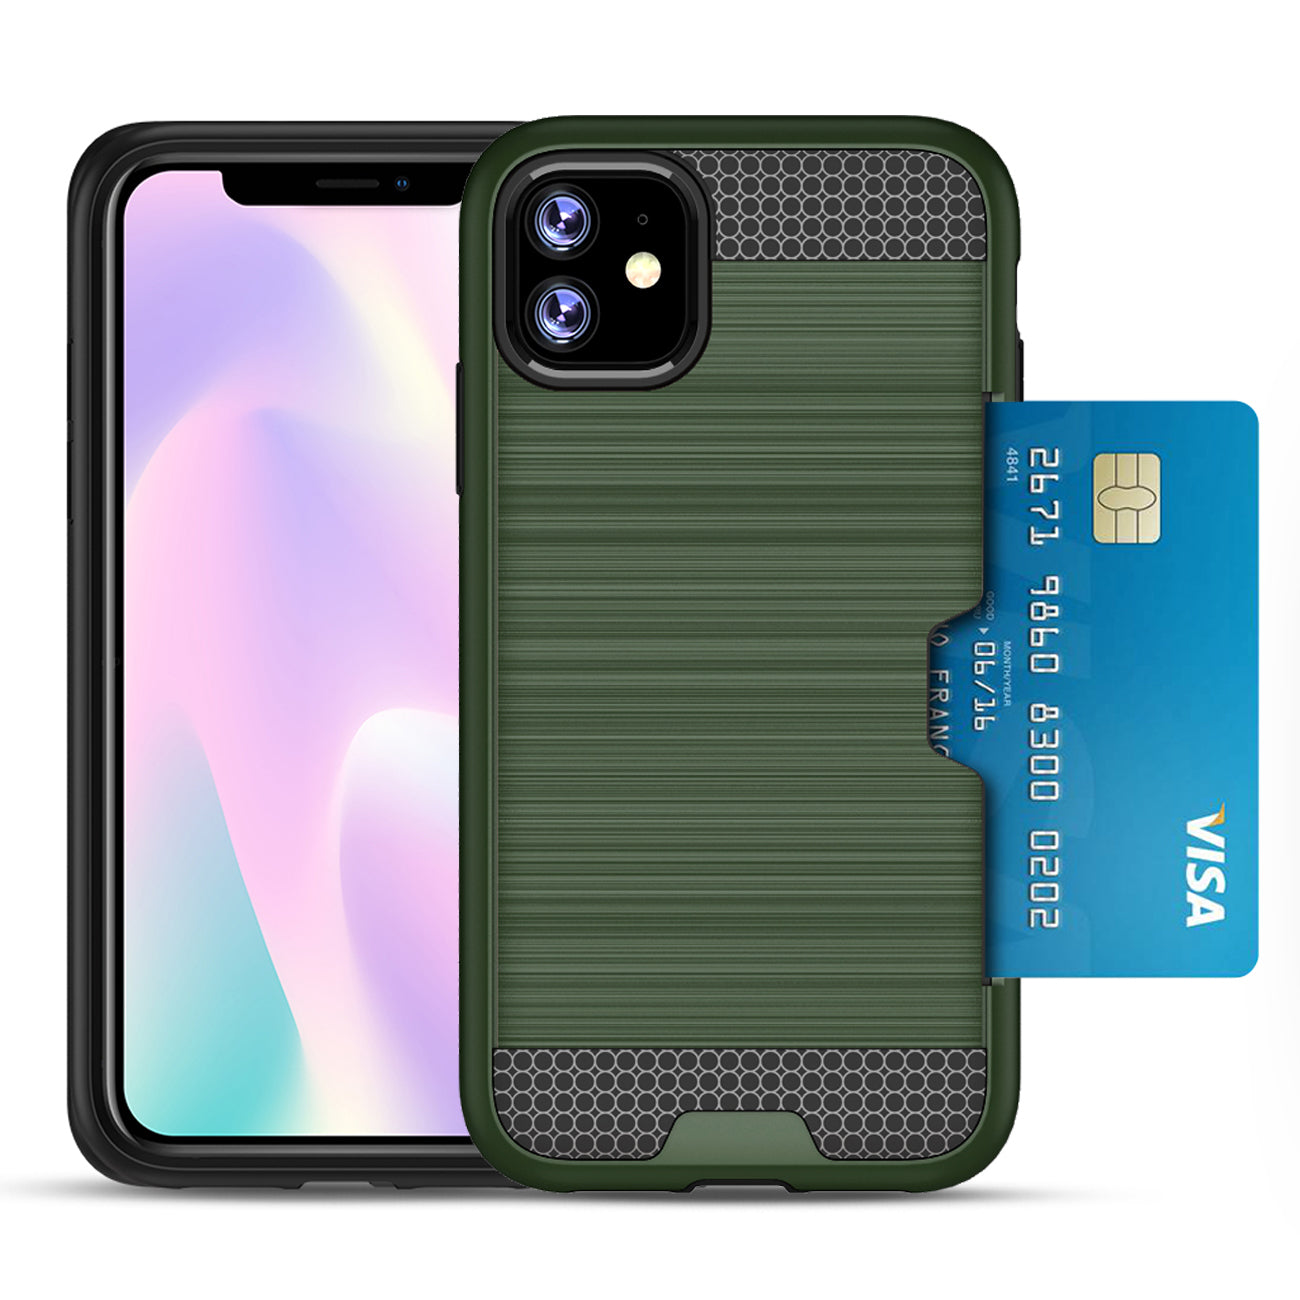 iPhone 11 SLIM ARMOR HYBRID CASE WITH CARD HOLDER IN GREEN